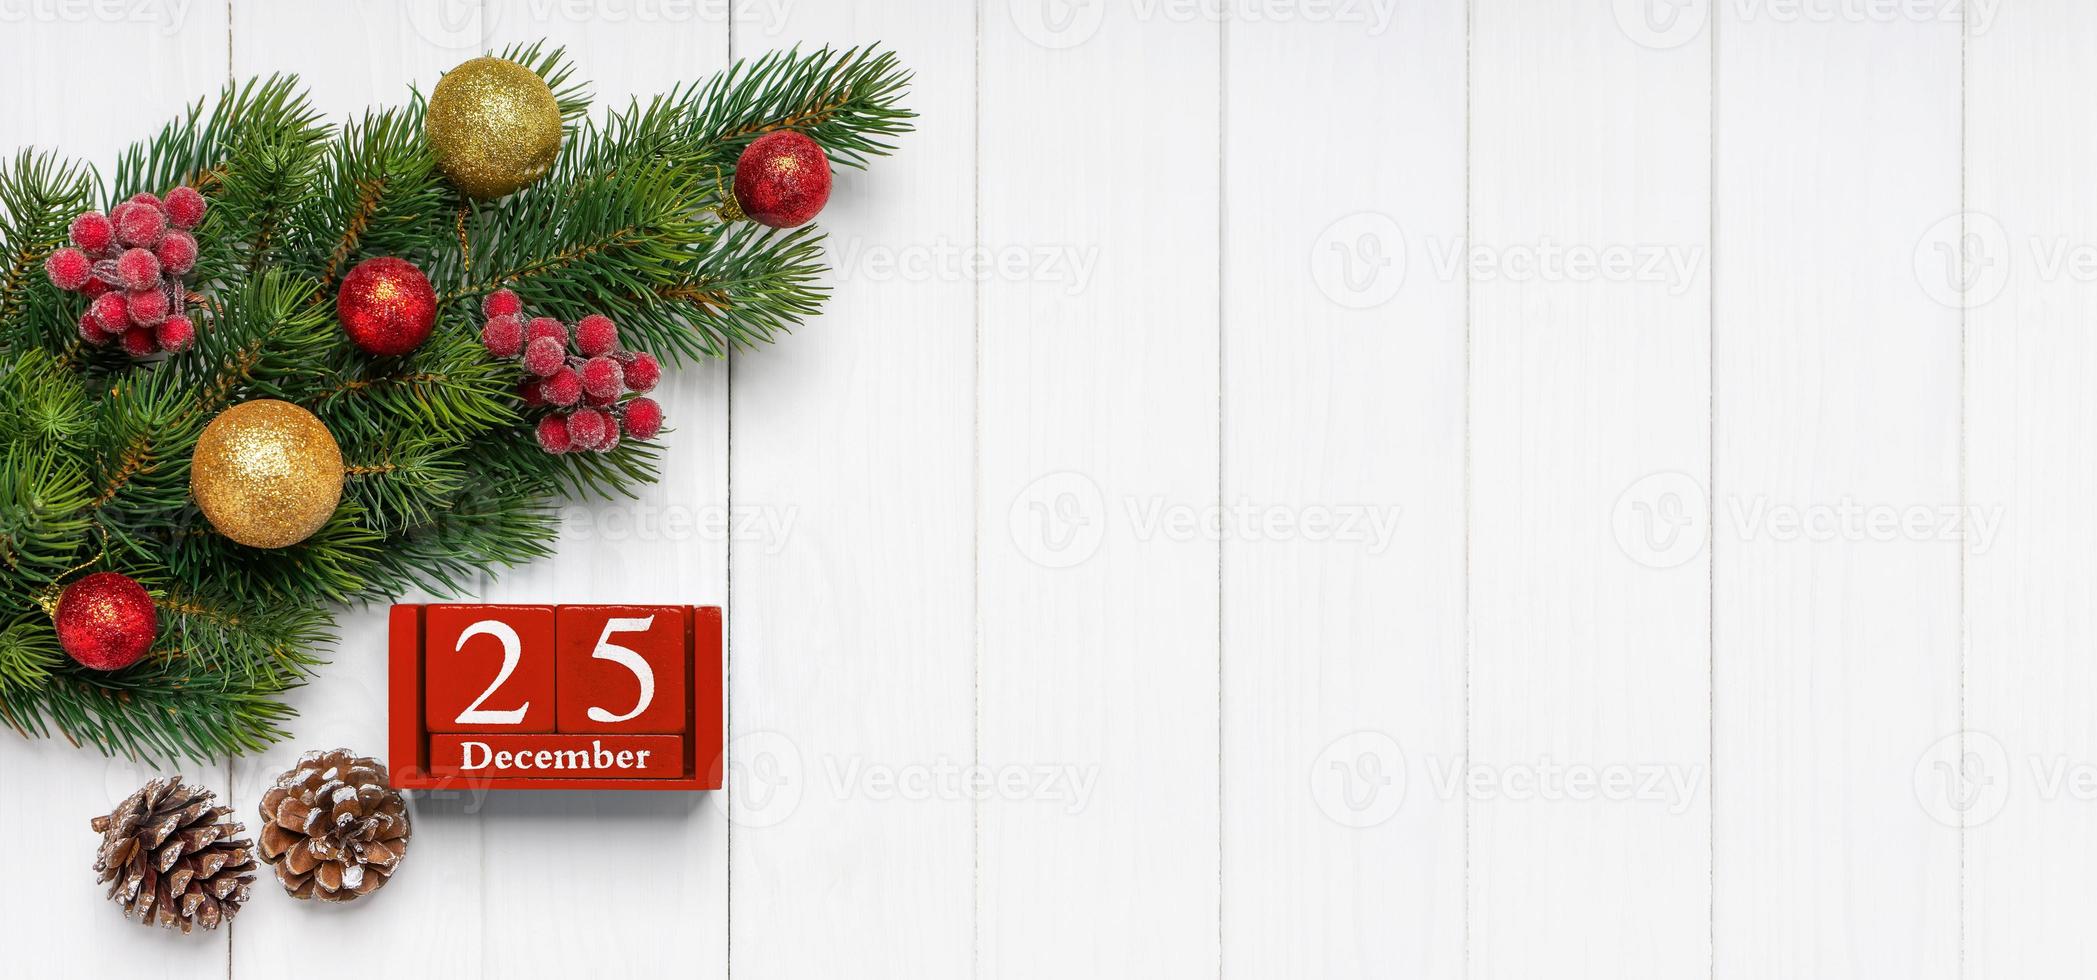 New Year background with decorated fir tree and red perpetual calendar of cubes photo